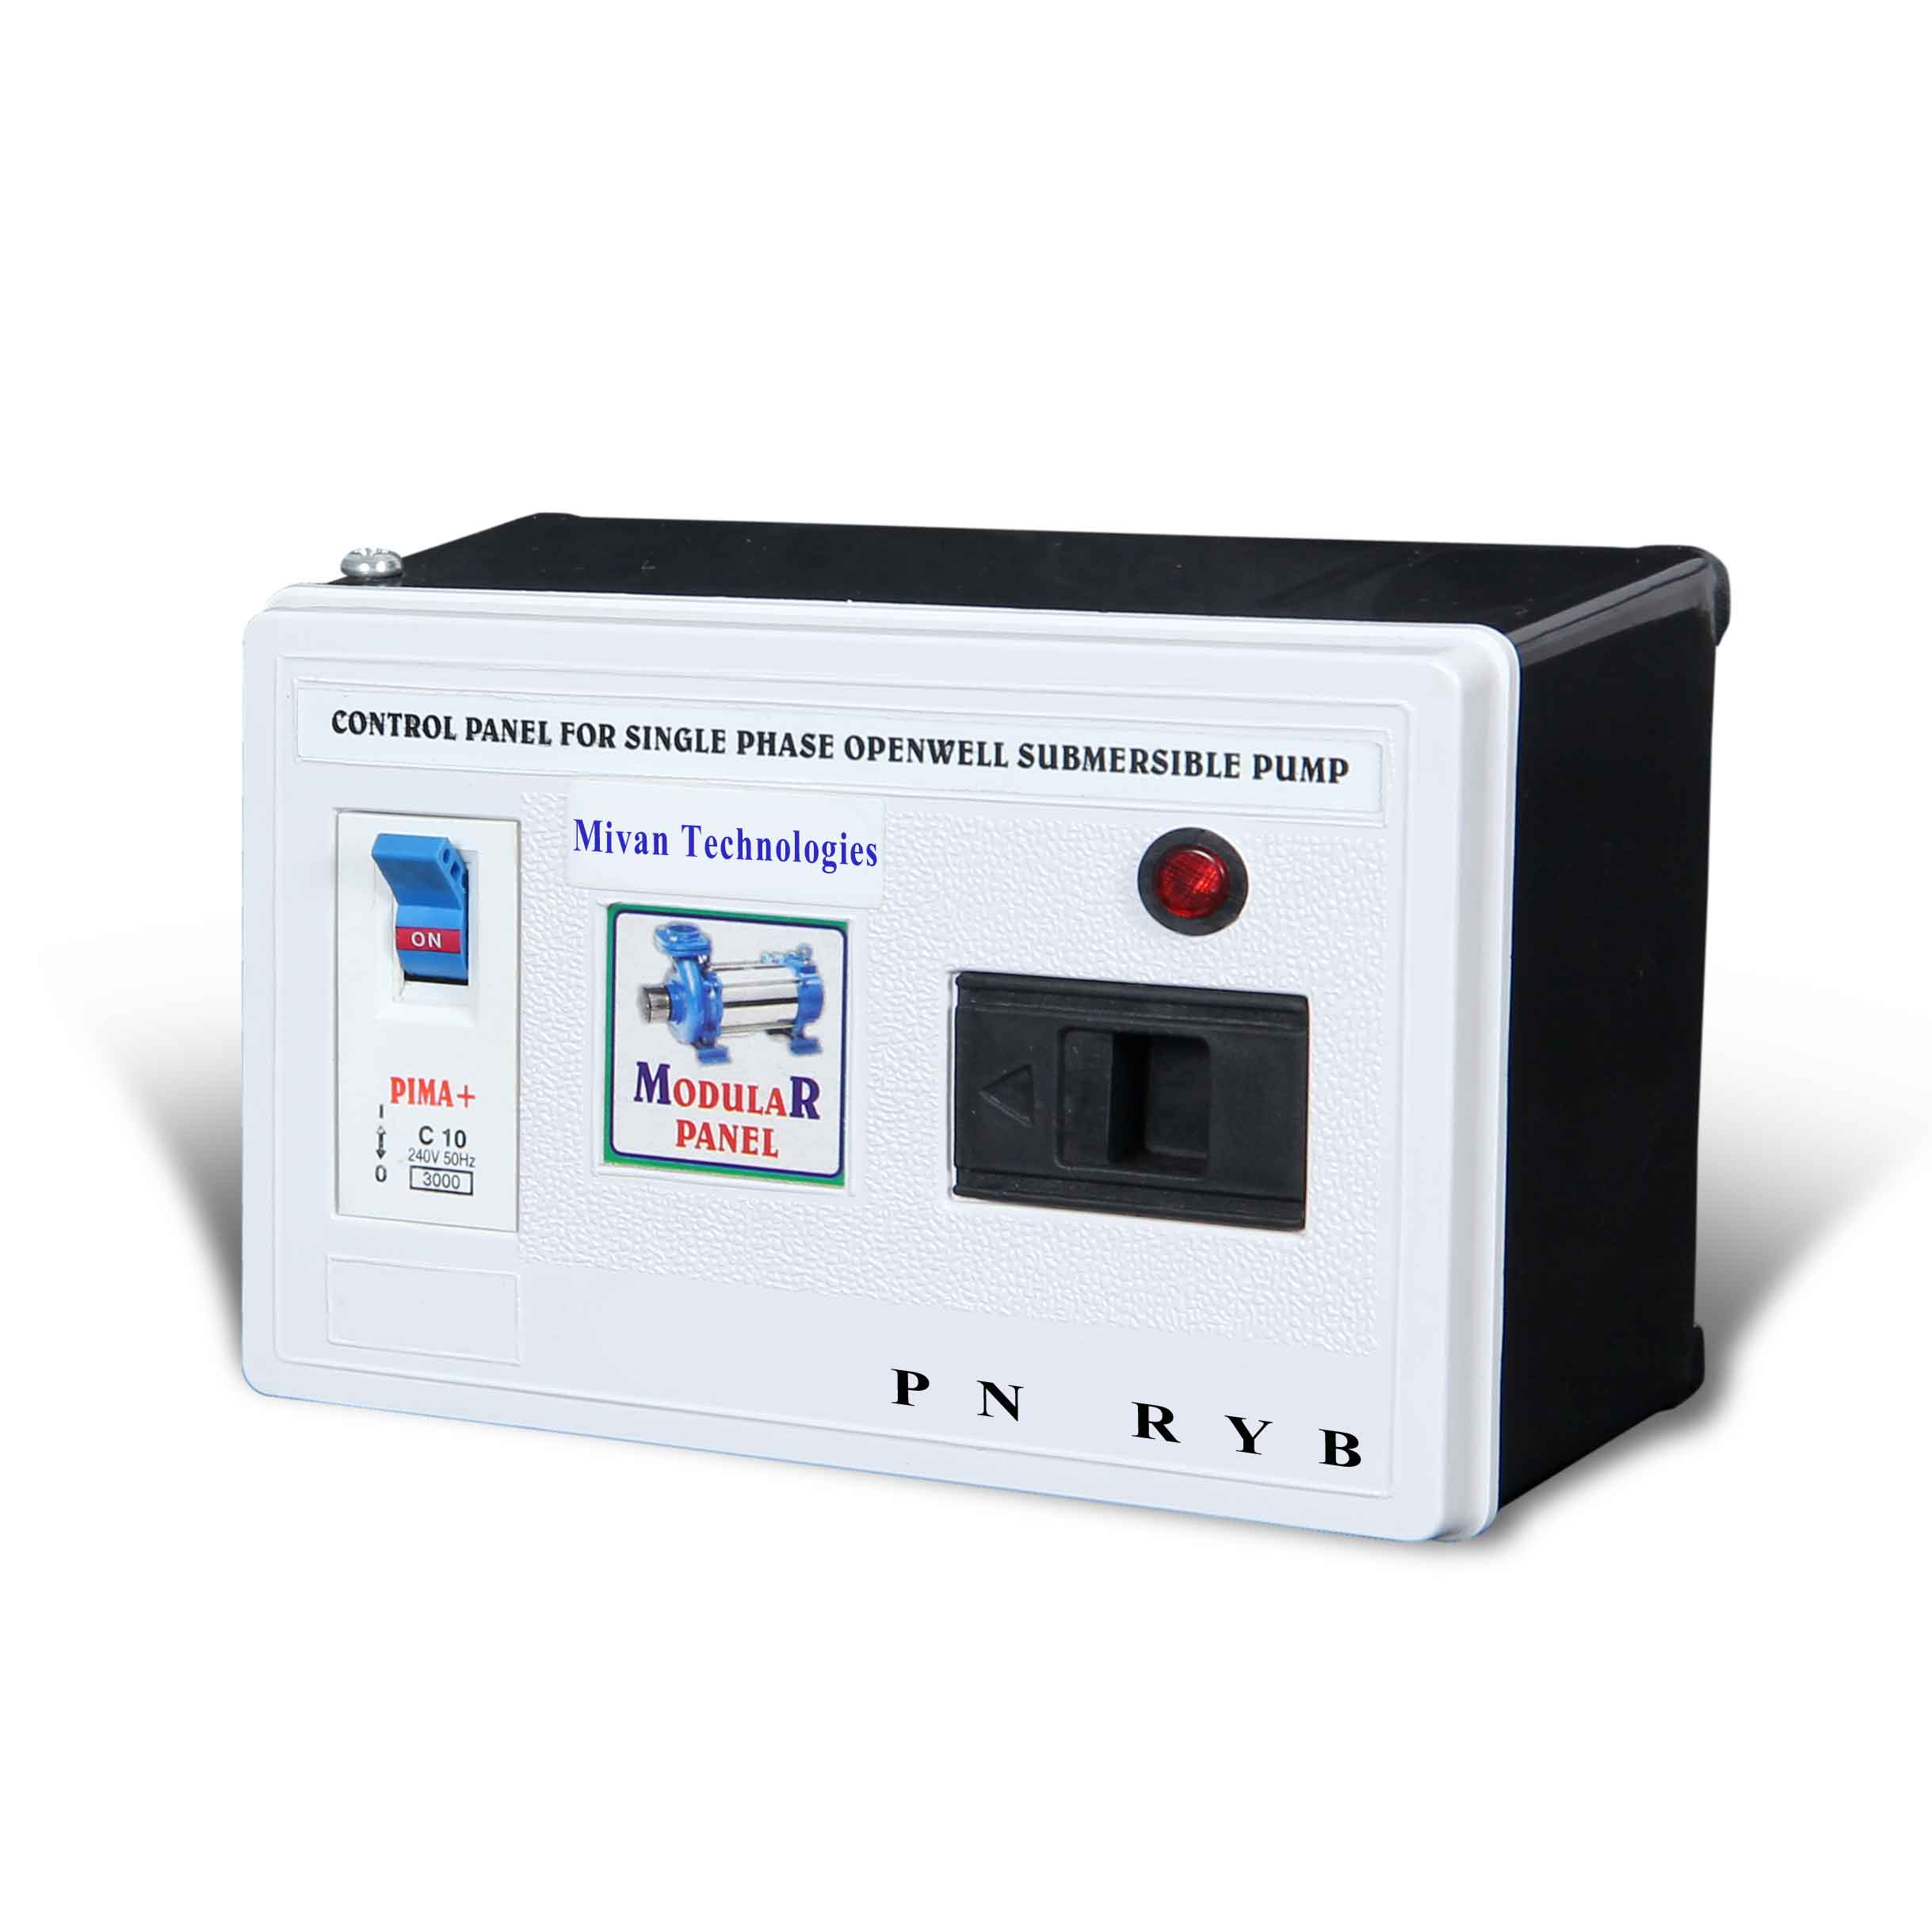 Single Phase motor starter suitable for all single phase submersible motor and pump suitable up to 1 hp motor